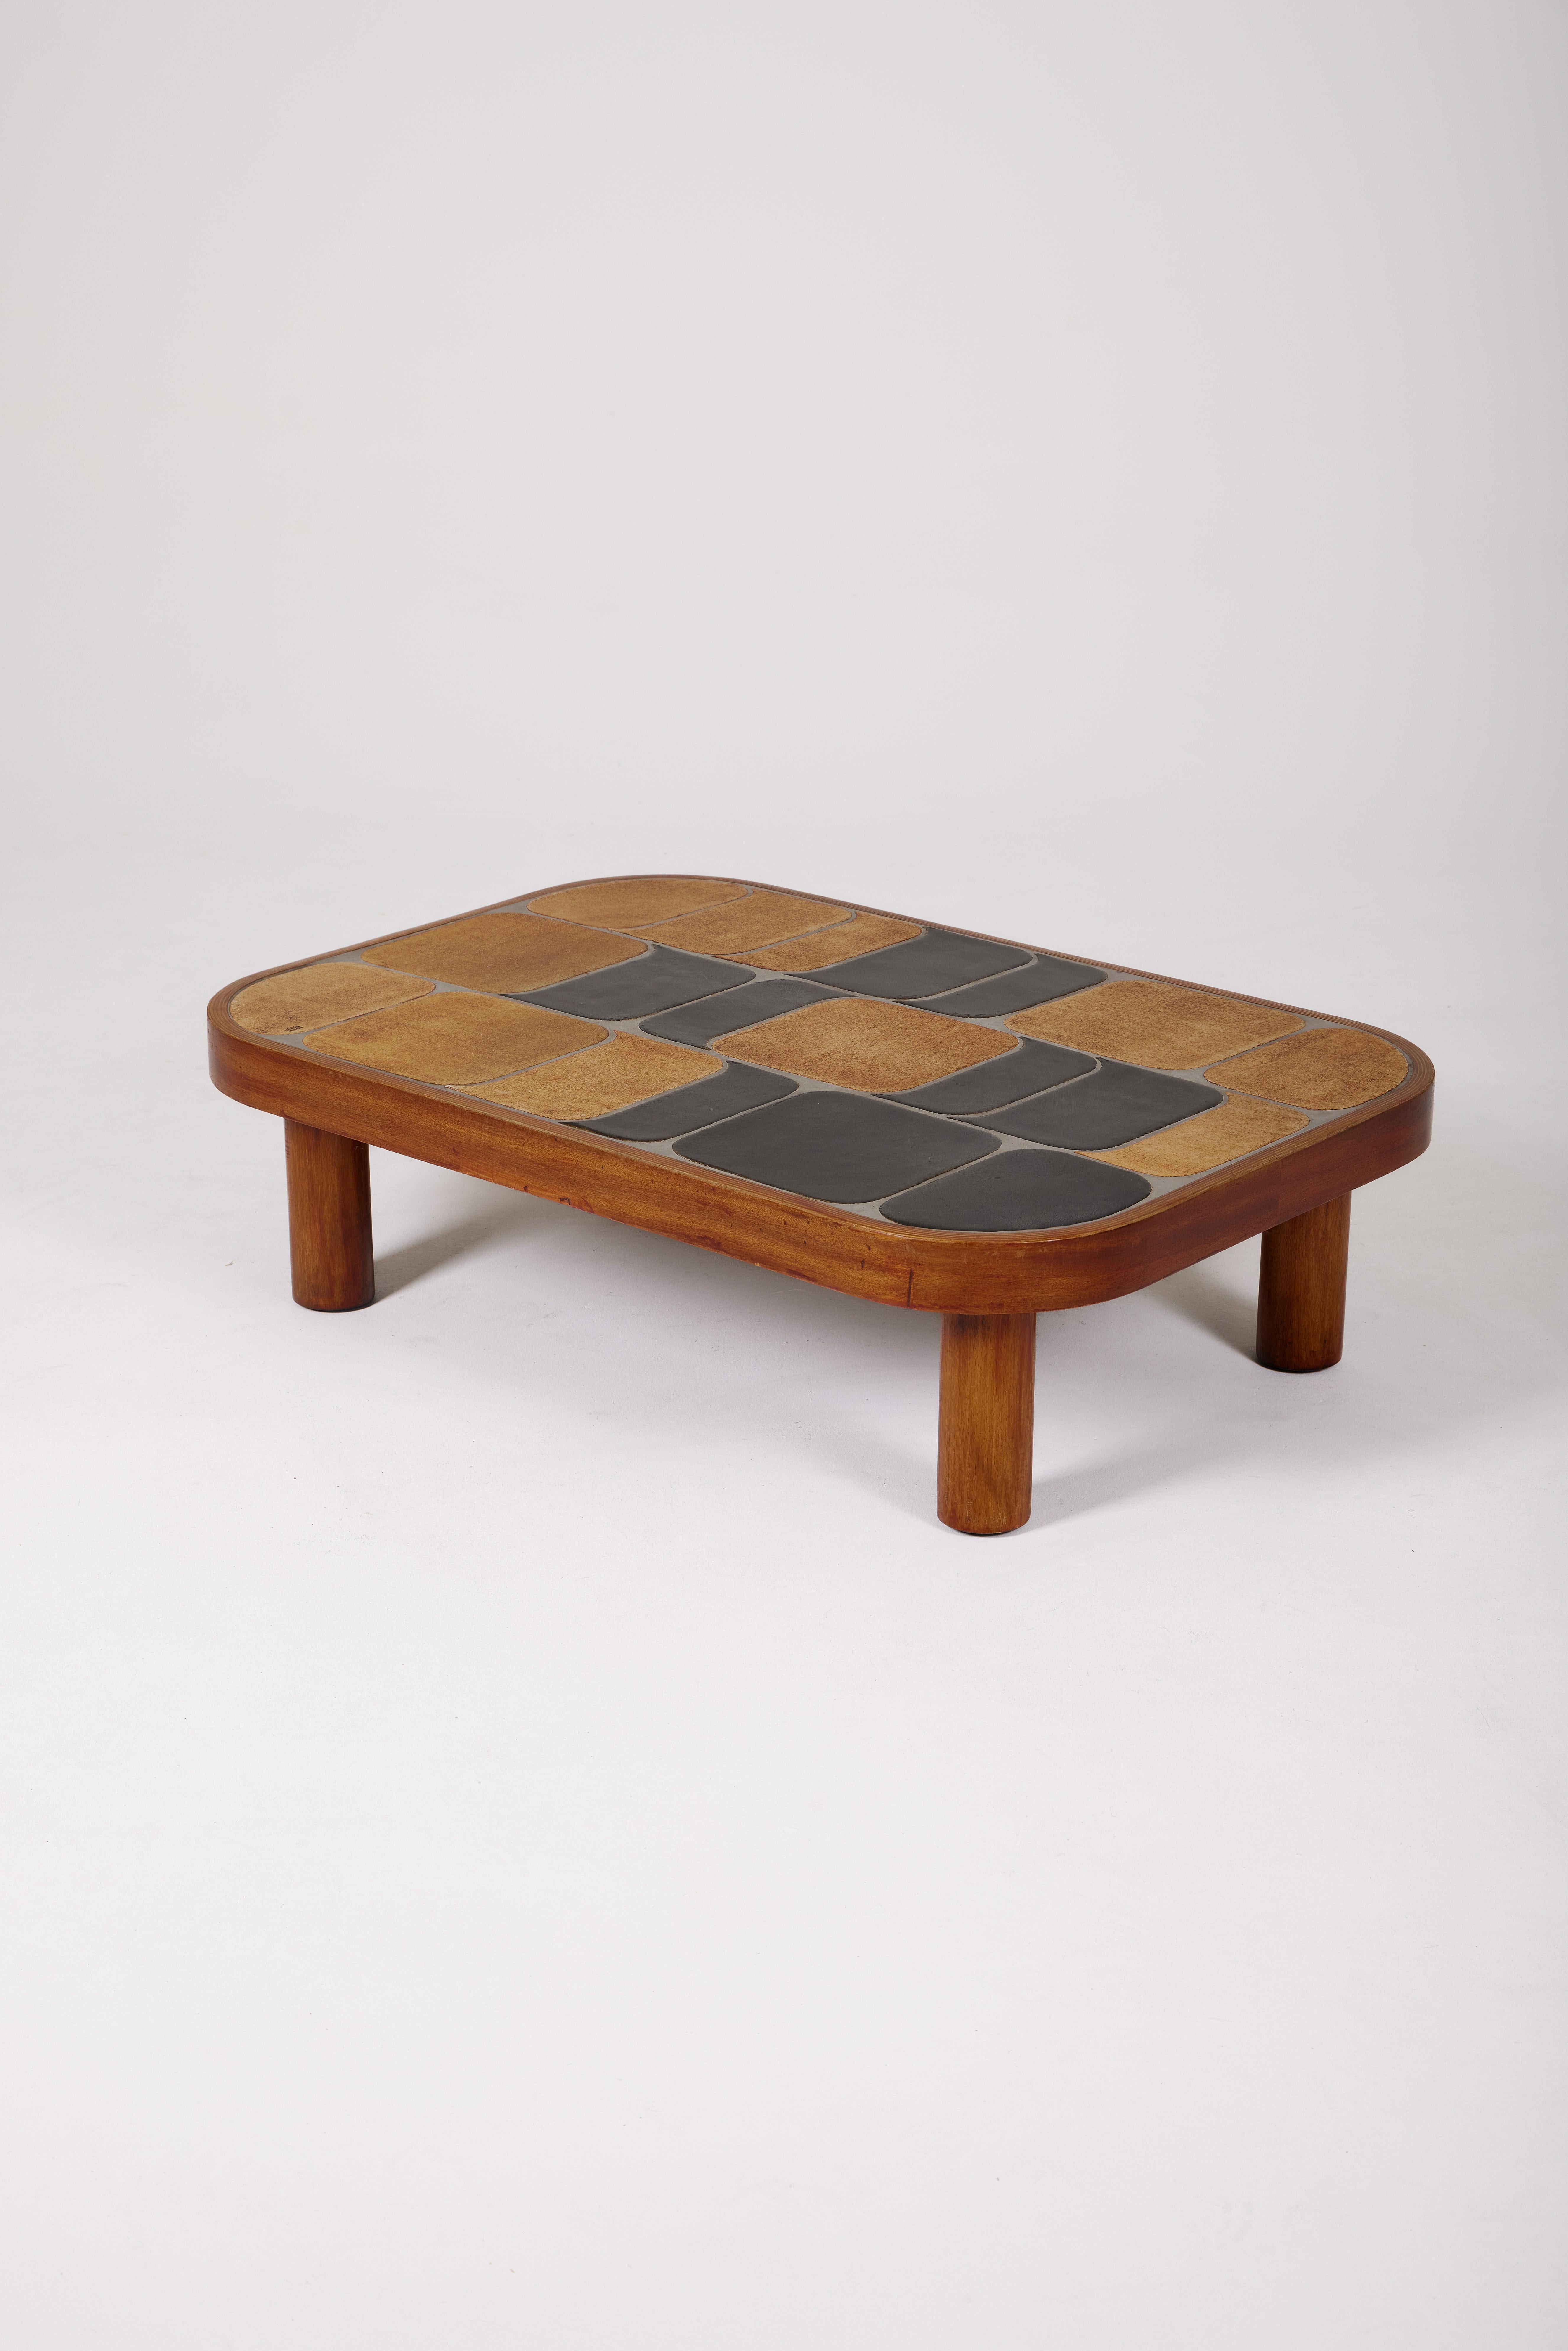 Ceramic coffee table often referred to as the Shogun model, but actually the Sou Chong model designed by Roger Capron in the 1970s. The structure is made of stained beechwood, and the tabletop features geometric patterns in ceramic.
LP1121